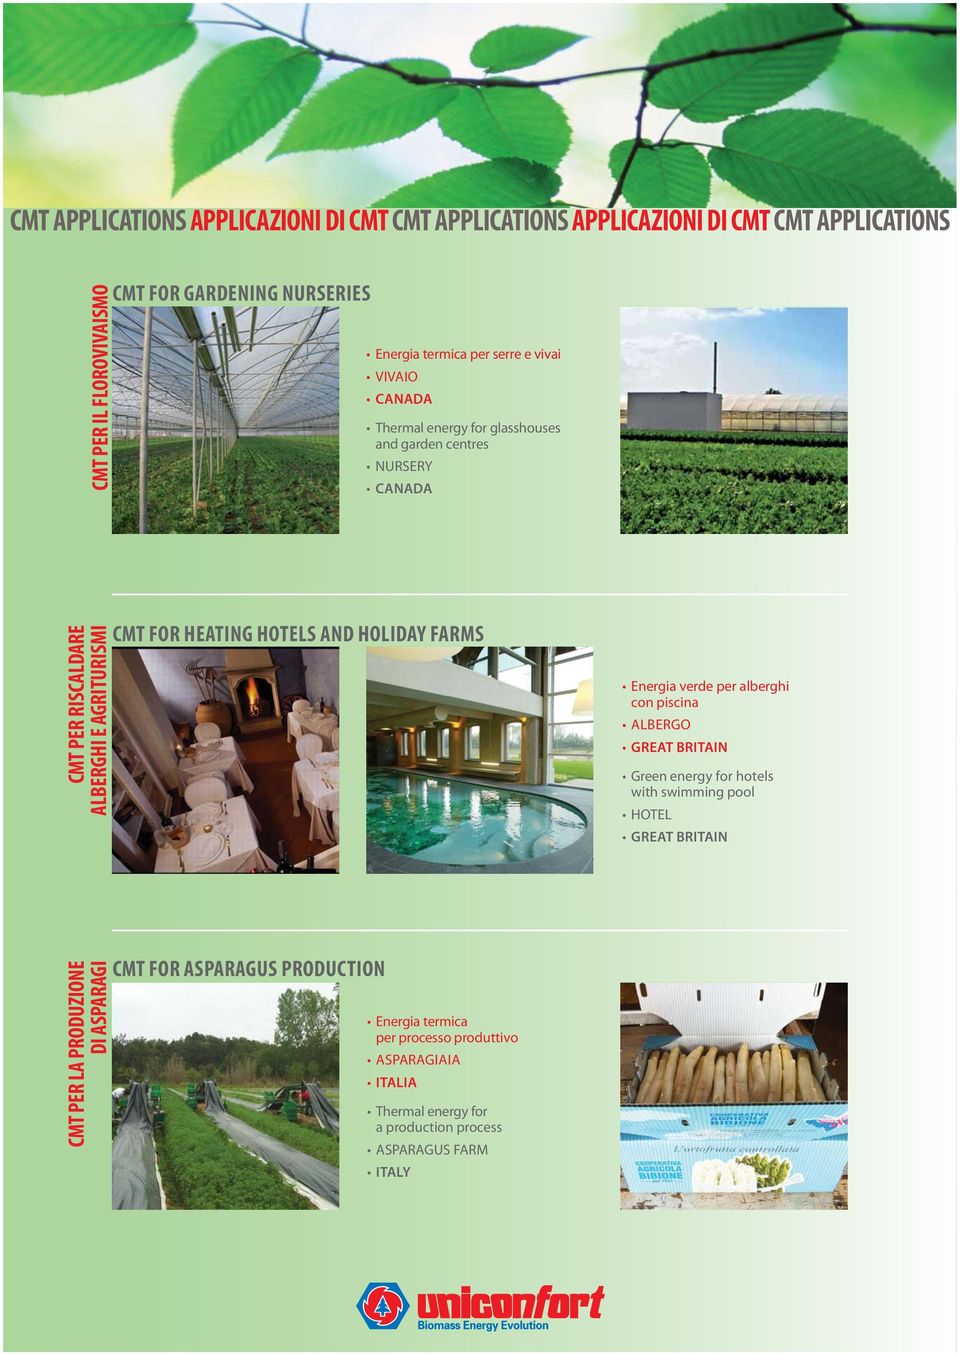 AND HOLIDAY FARMS Energia verde per alberghi con piscina ALBERGO GREAT BRITAIN Green energy for hotels with swimming pool HOTEL GREAT BRITAIN CMT PER LA